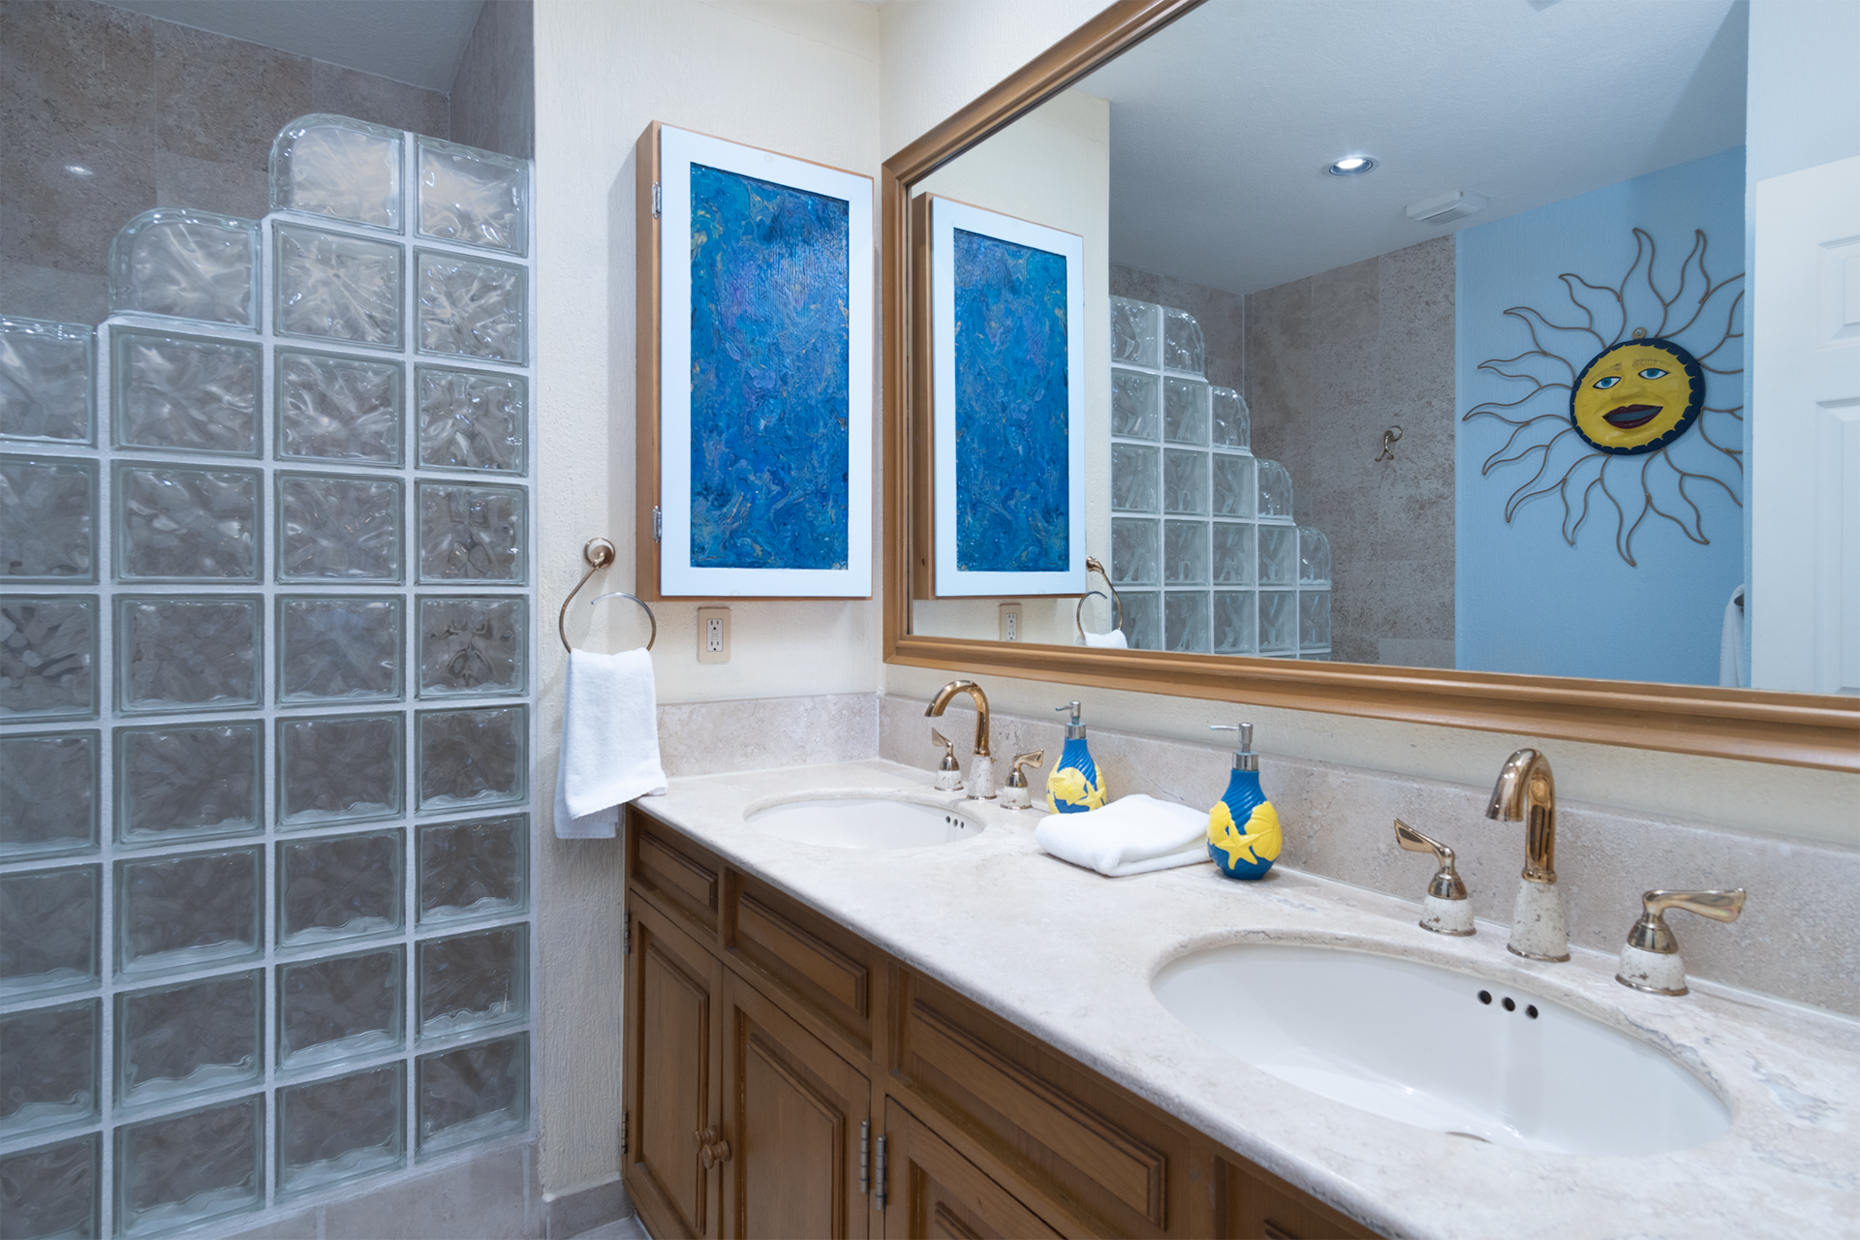 The main bathroom has smart glass blocks around the shower, and a double vanity sink area.